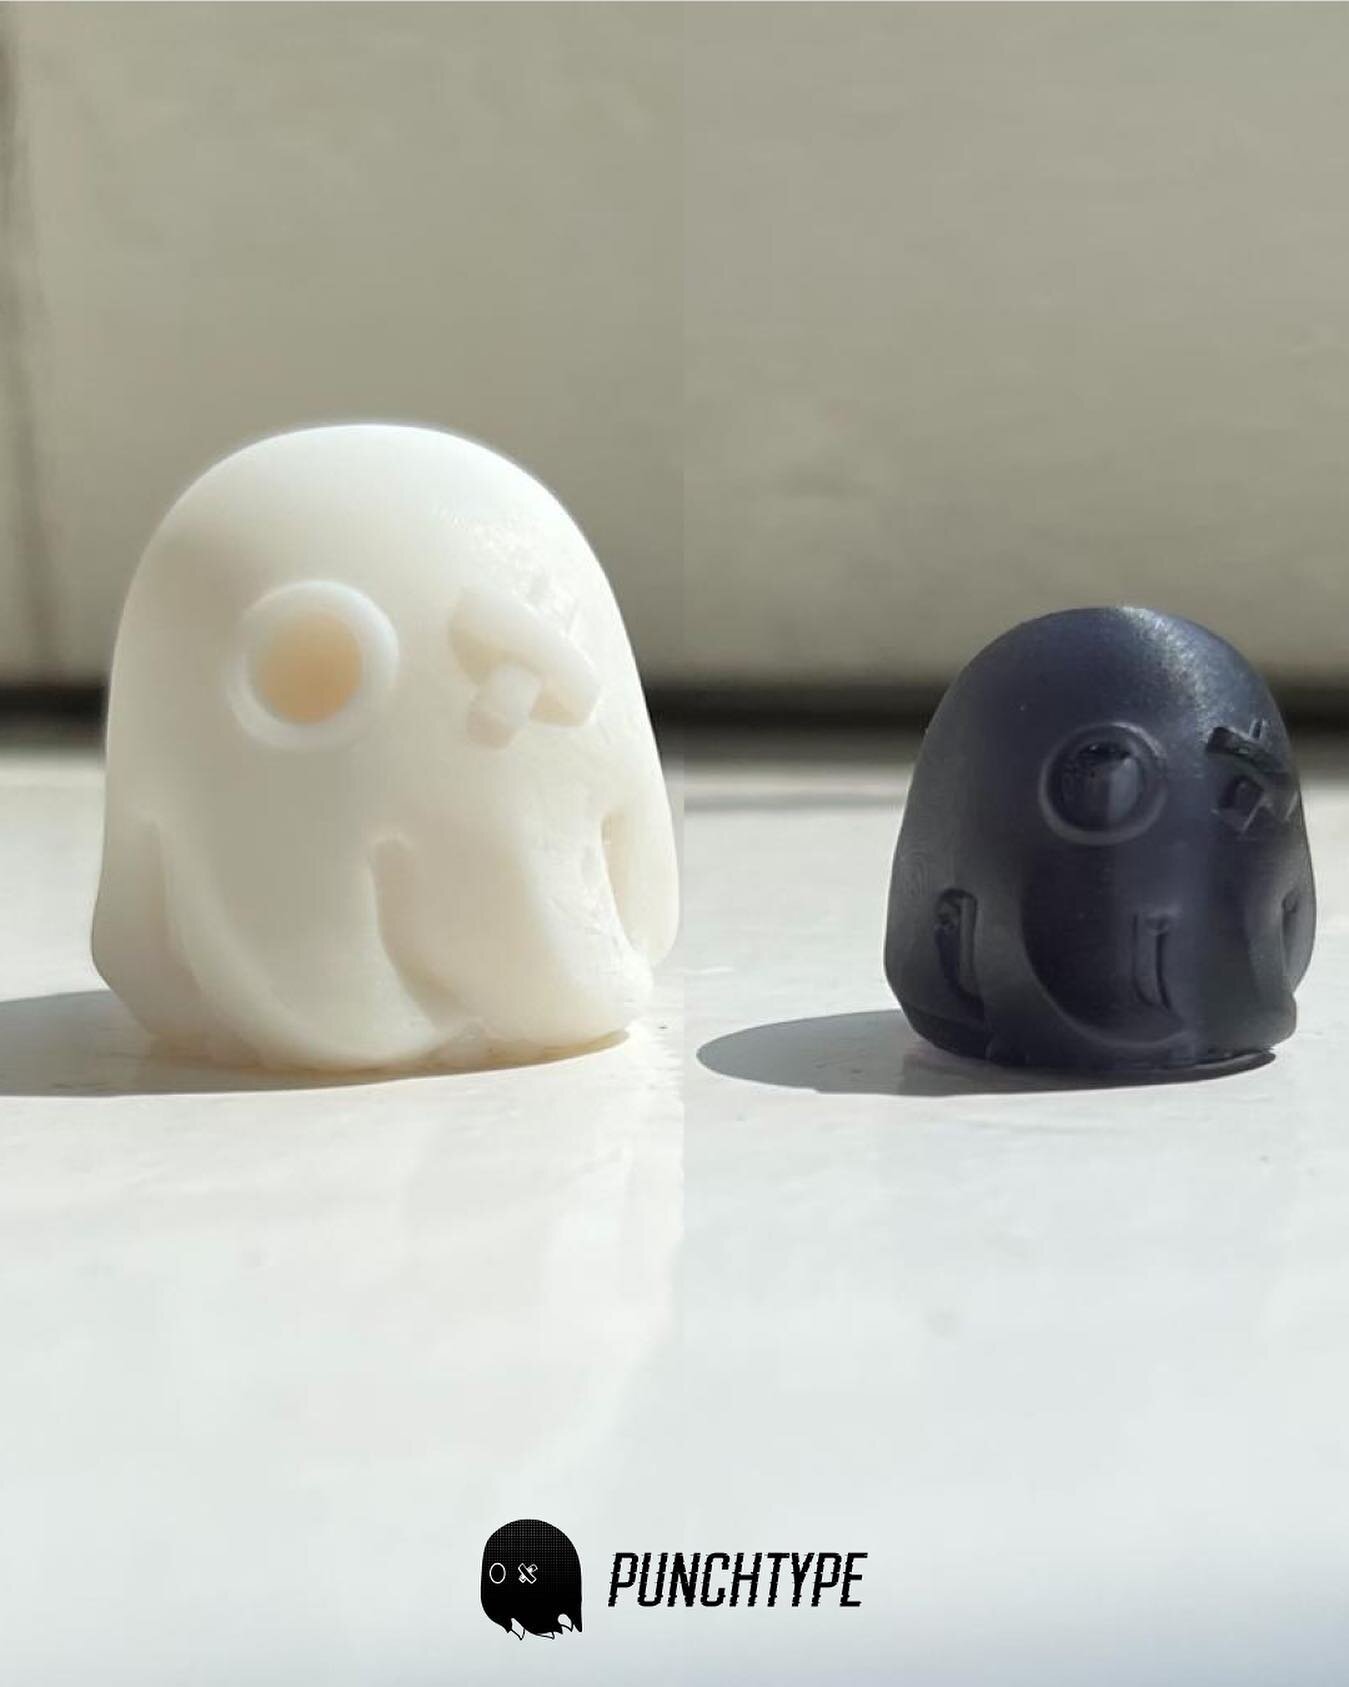 Send us your ghost photos!! 👻👻
We&rsquo;re so happy to have launched in the #mechanicalkeyboard community. We want photos of our toasty ghostys on your board! So send them in 🎉

#mechanicalkeyboards #mechmarket #artisankeycaps #artisankeycap #cust